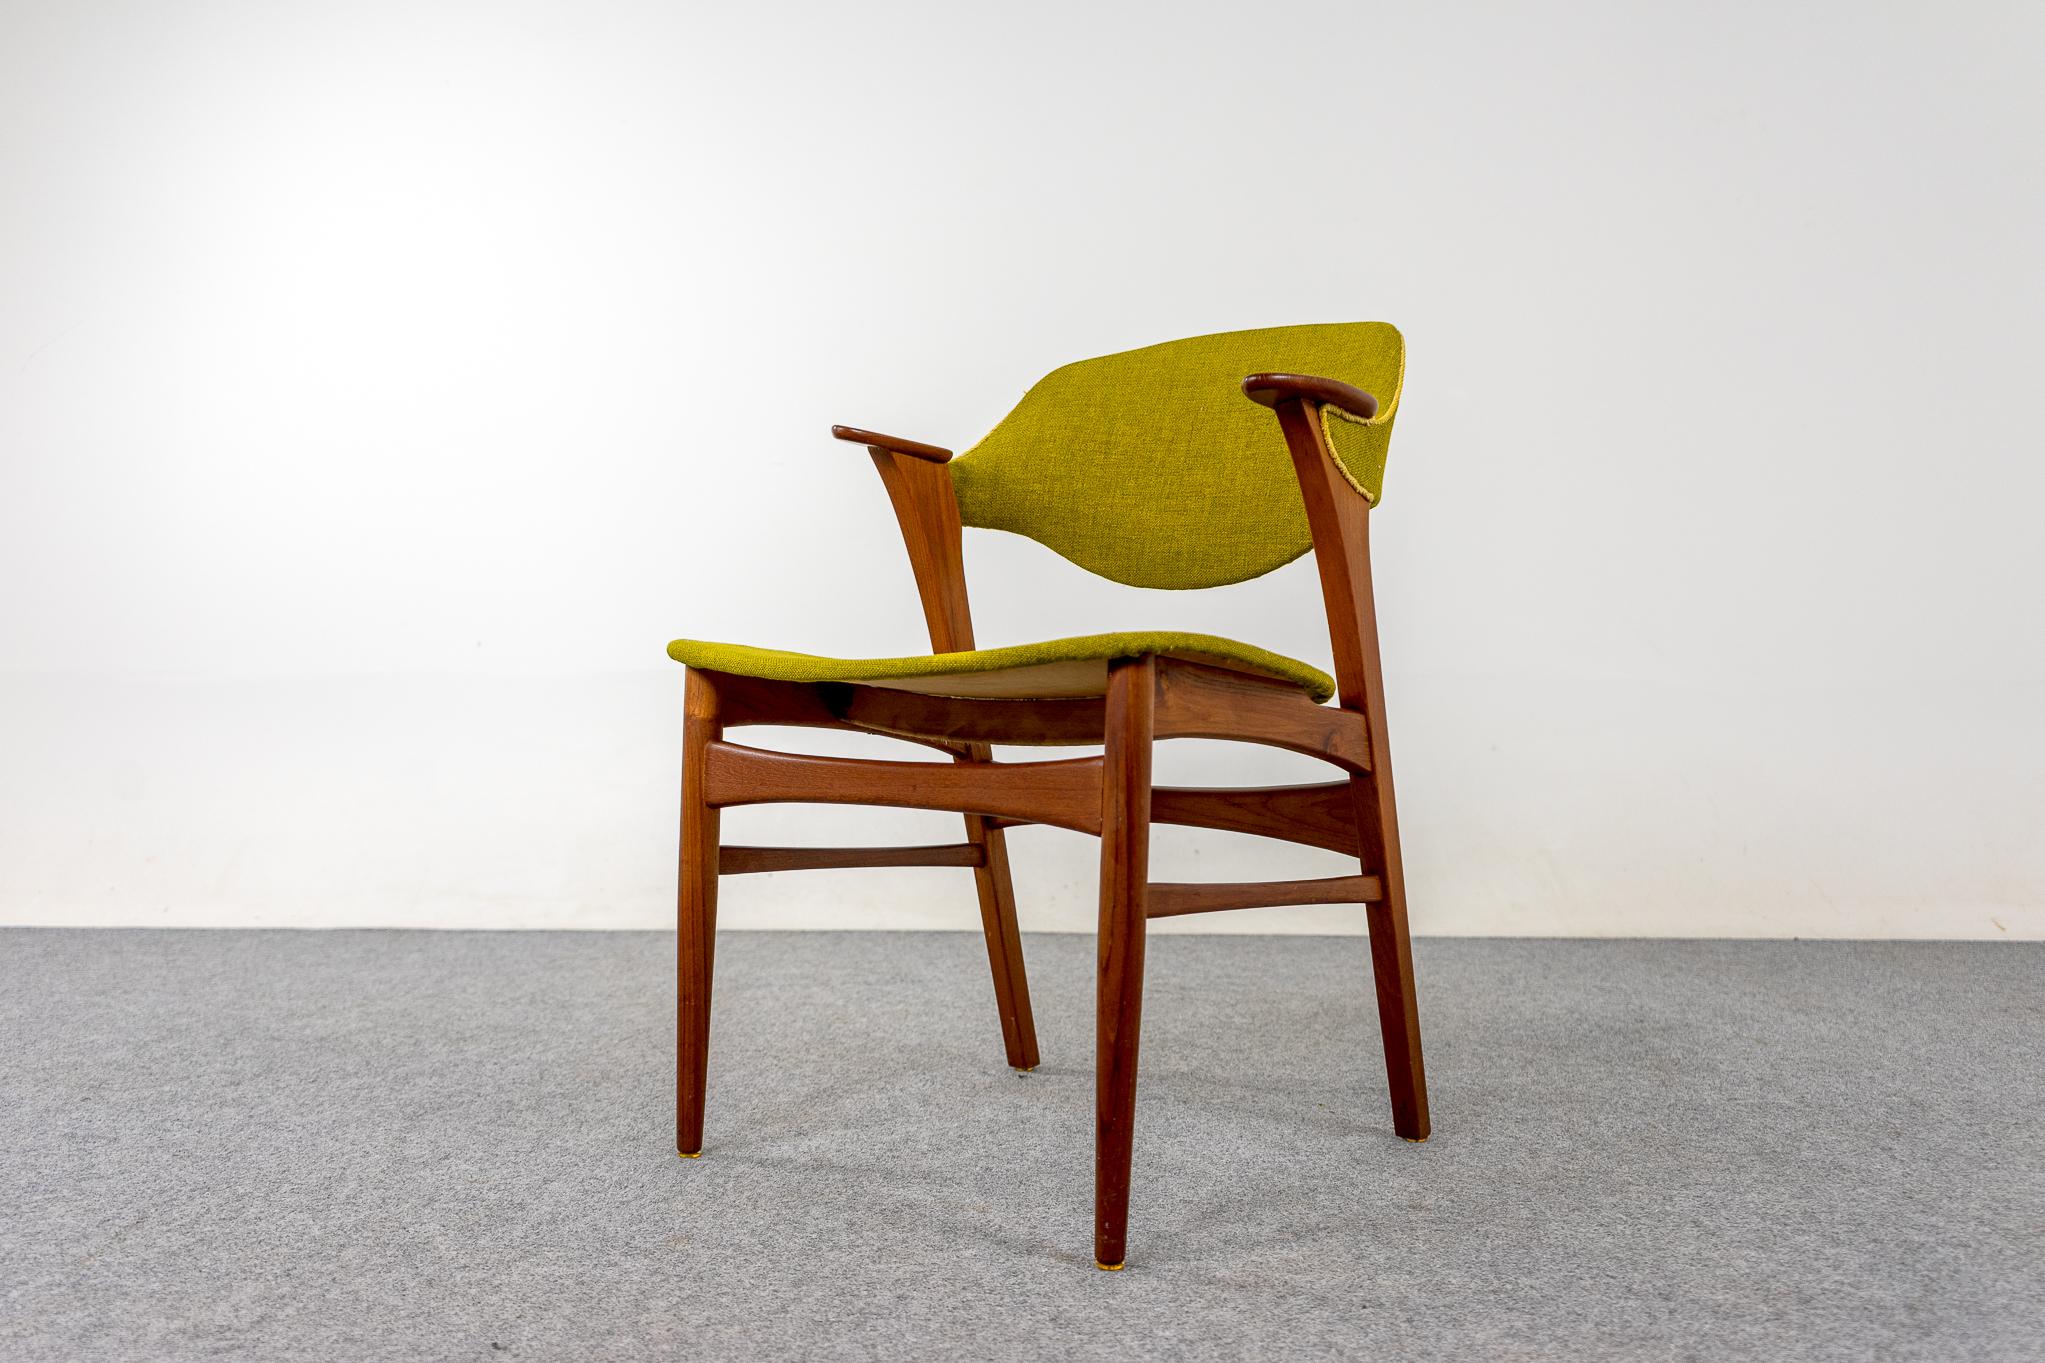 Teak Danish armchair, circa 1960's. Elegant frame with swooping arms, perfectly scaled for a desk, or side chair. Beautifully sculpted frame offers comfort without an imposing footprint. Original upholstery is very vibrant, great color. Brighten up